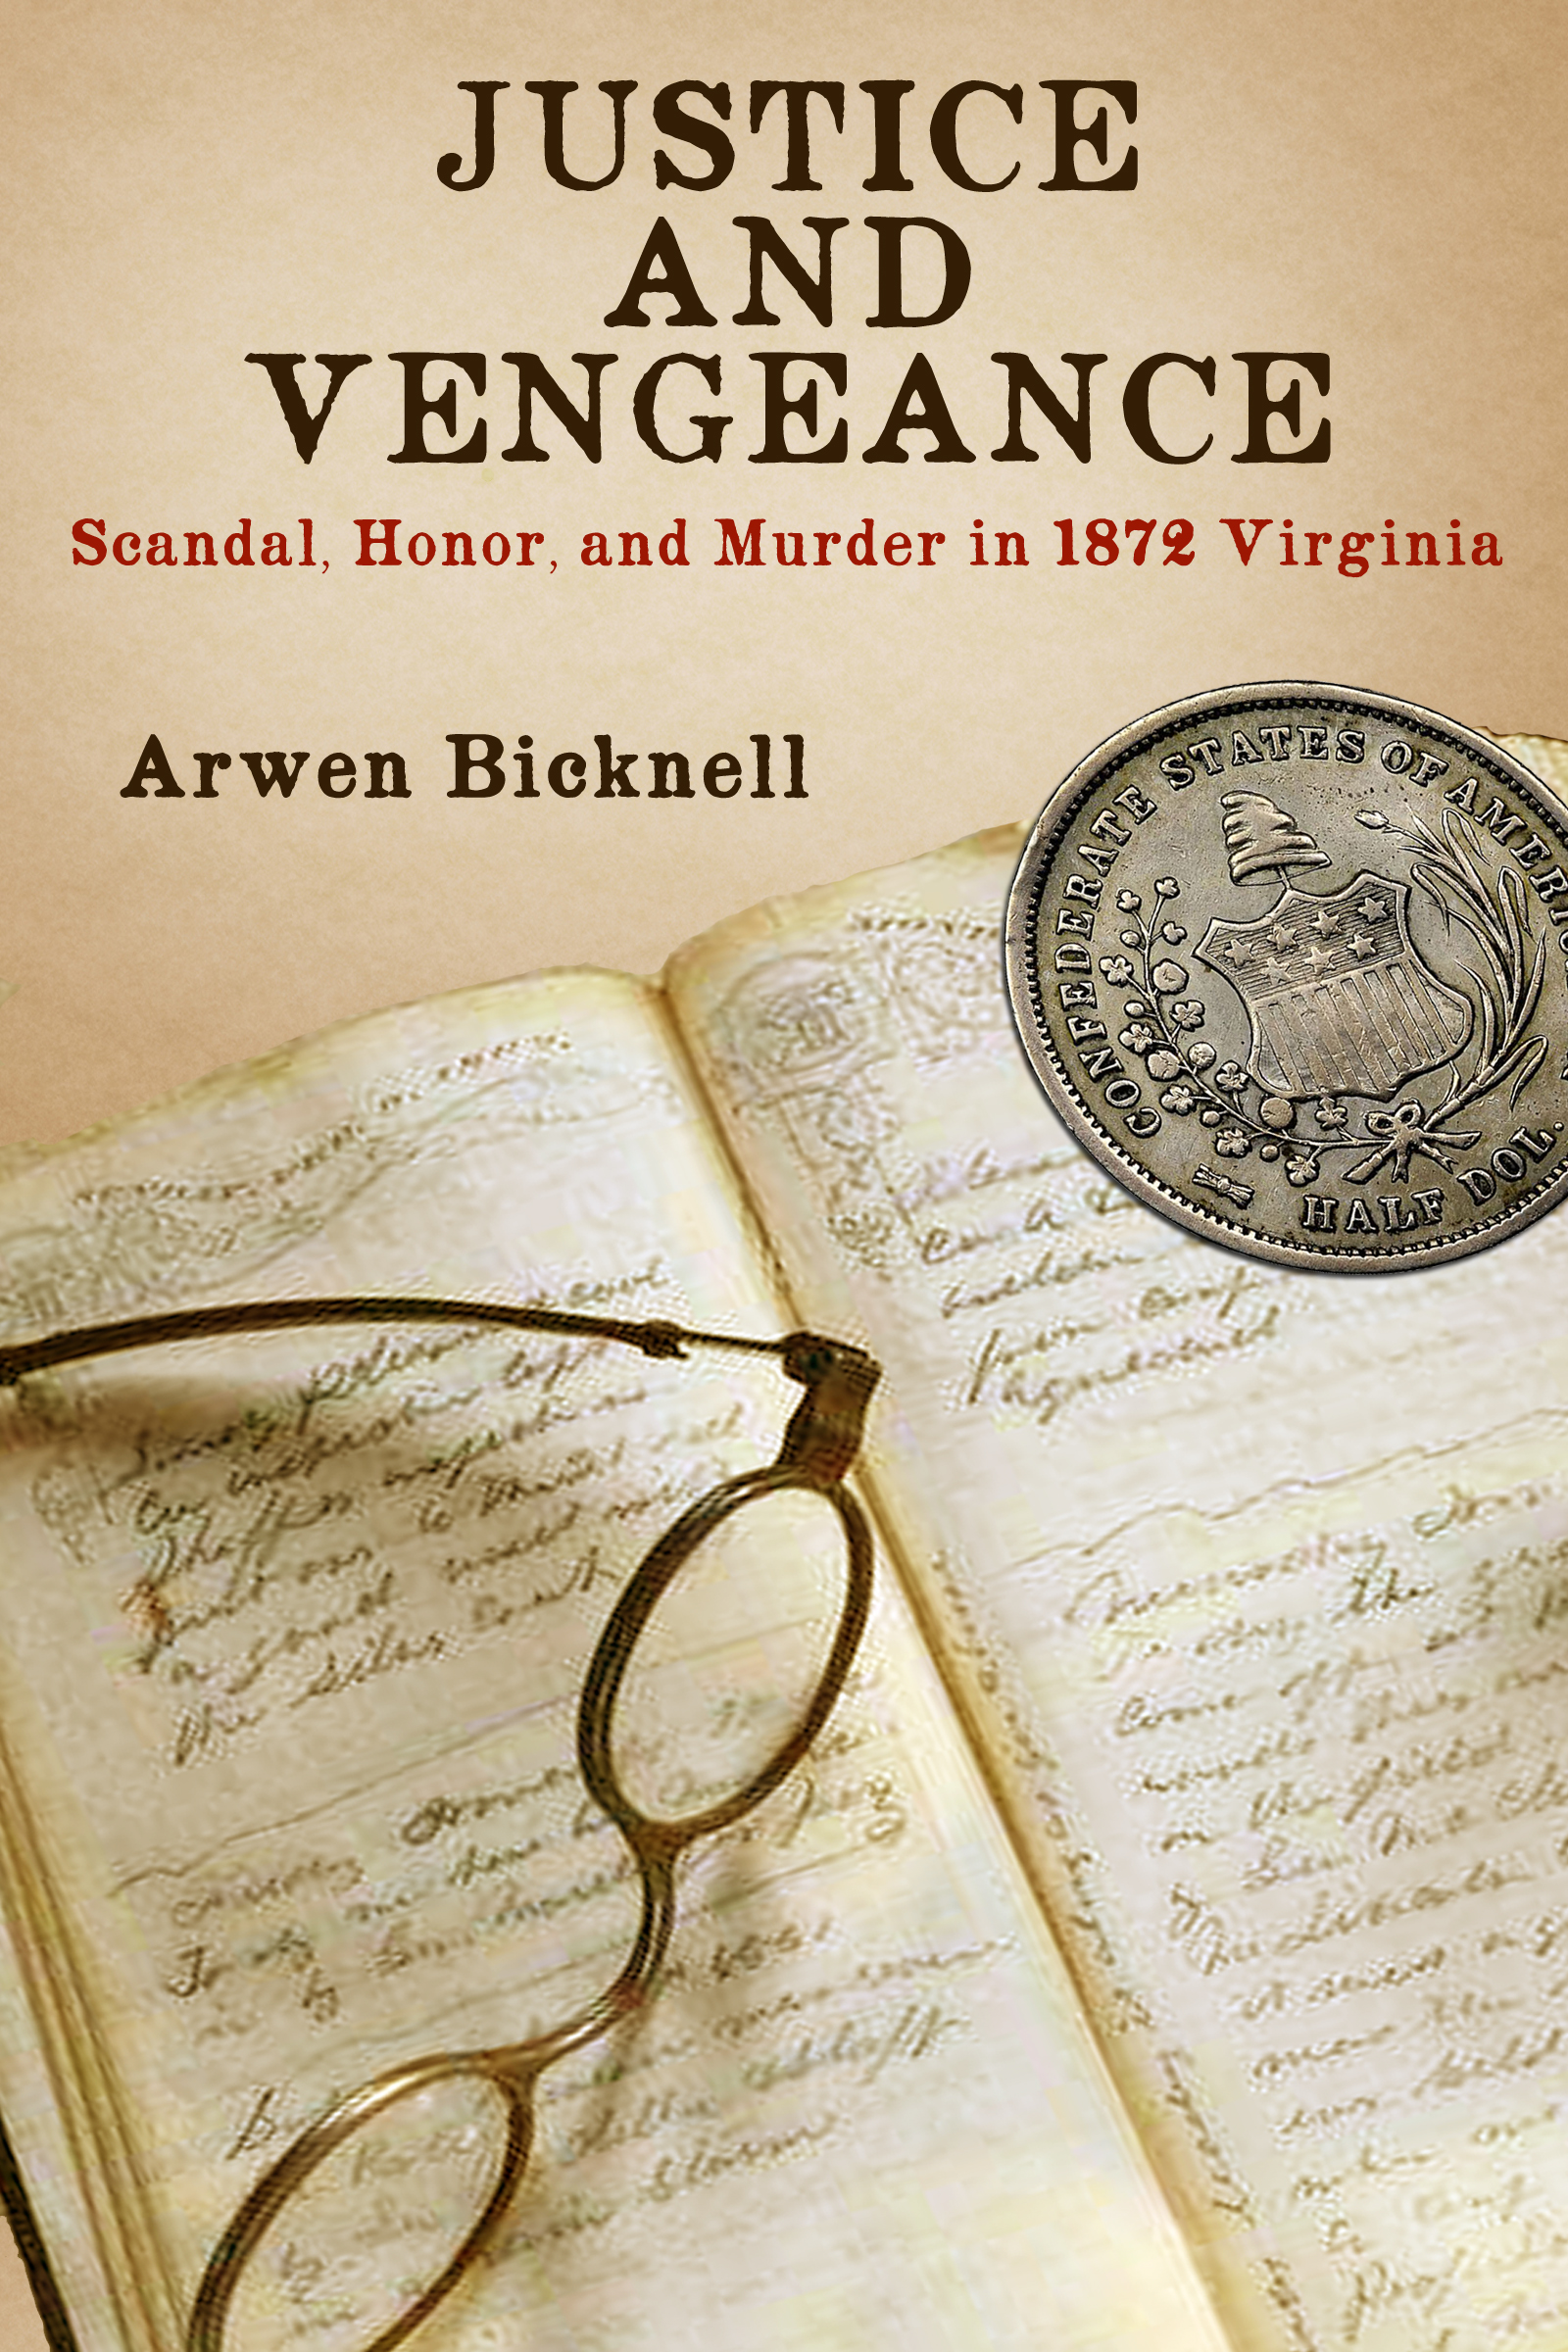 Justice and Vengeance: Scandal, Honor, and Murder in 1872 Virginia by Arwen Bicknell